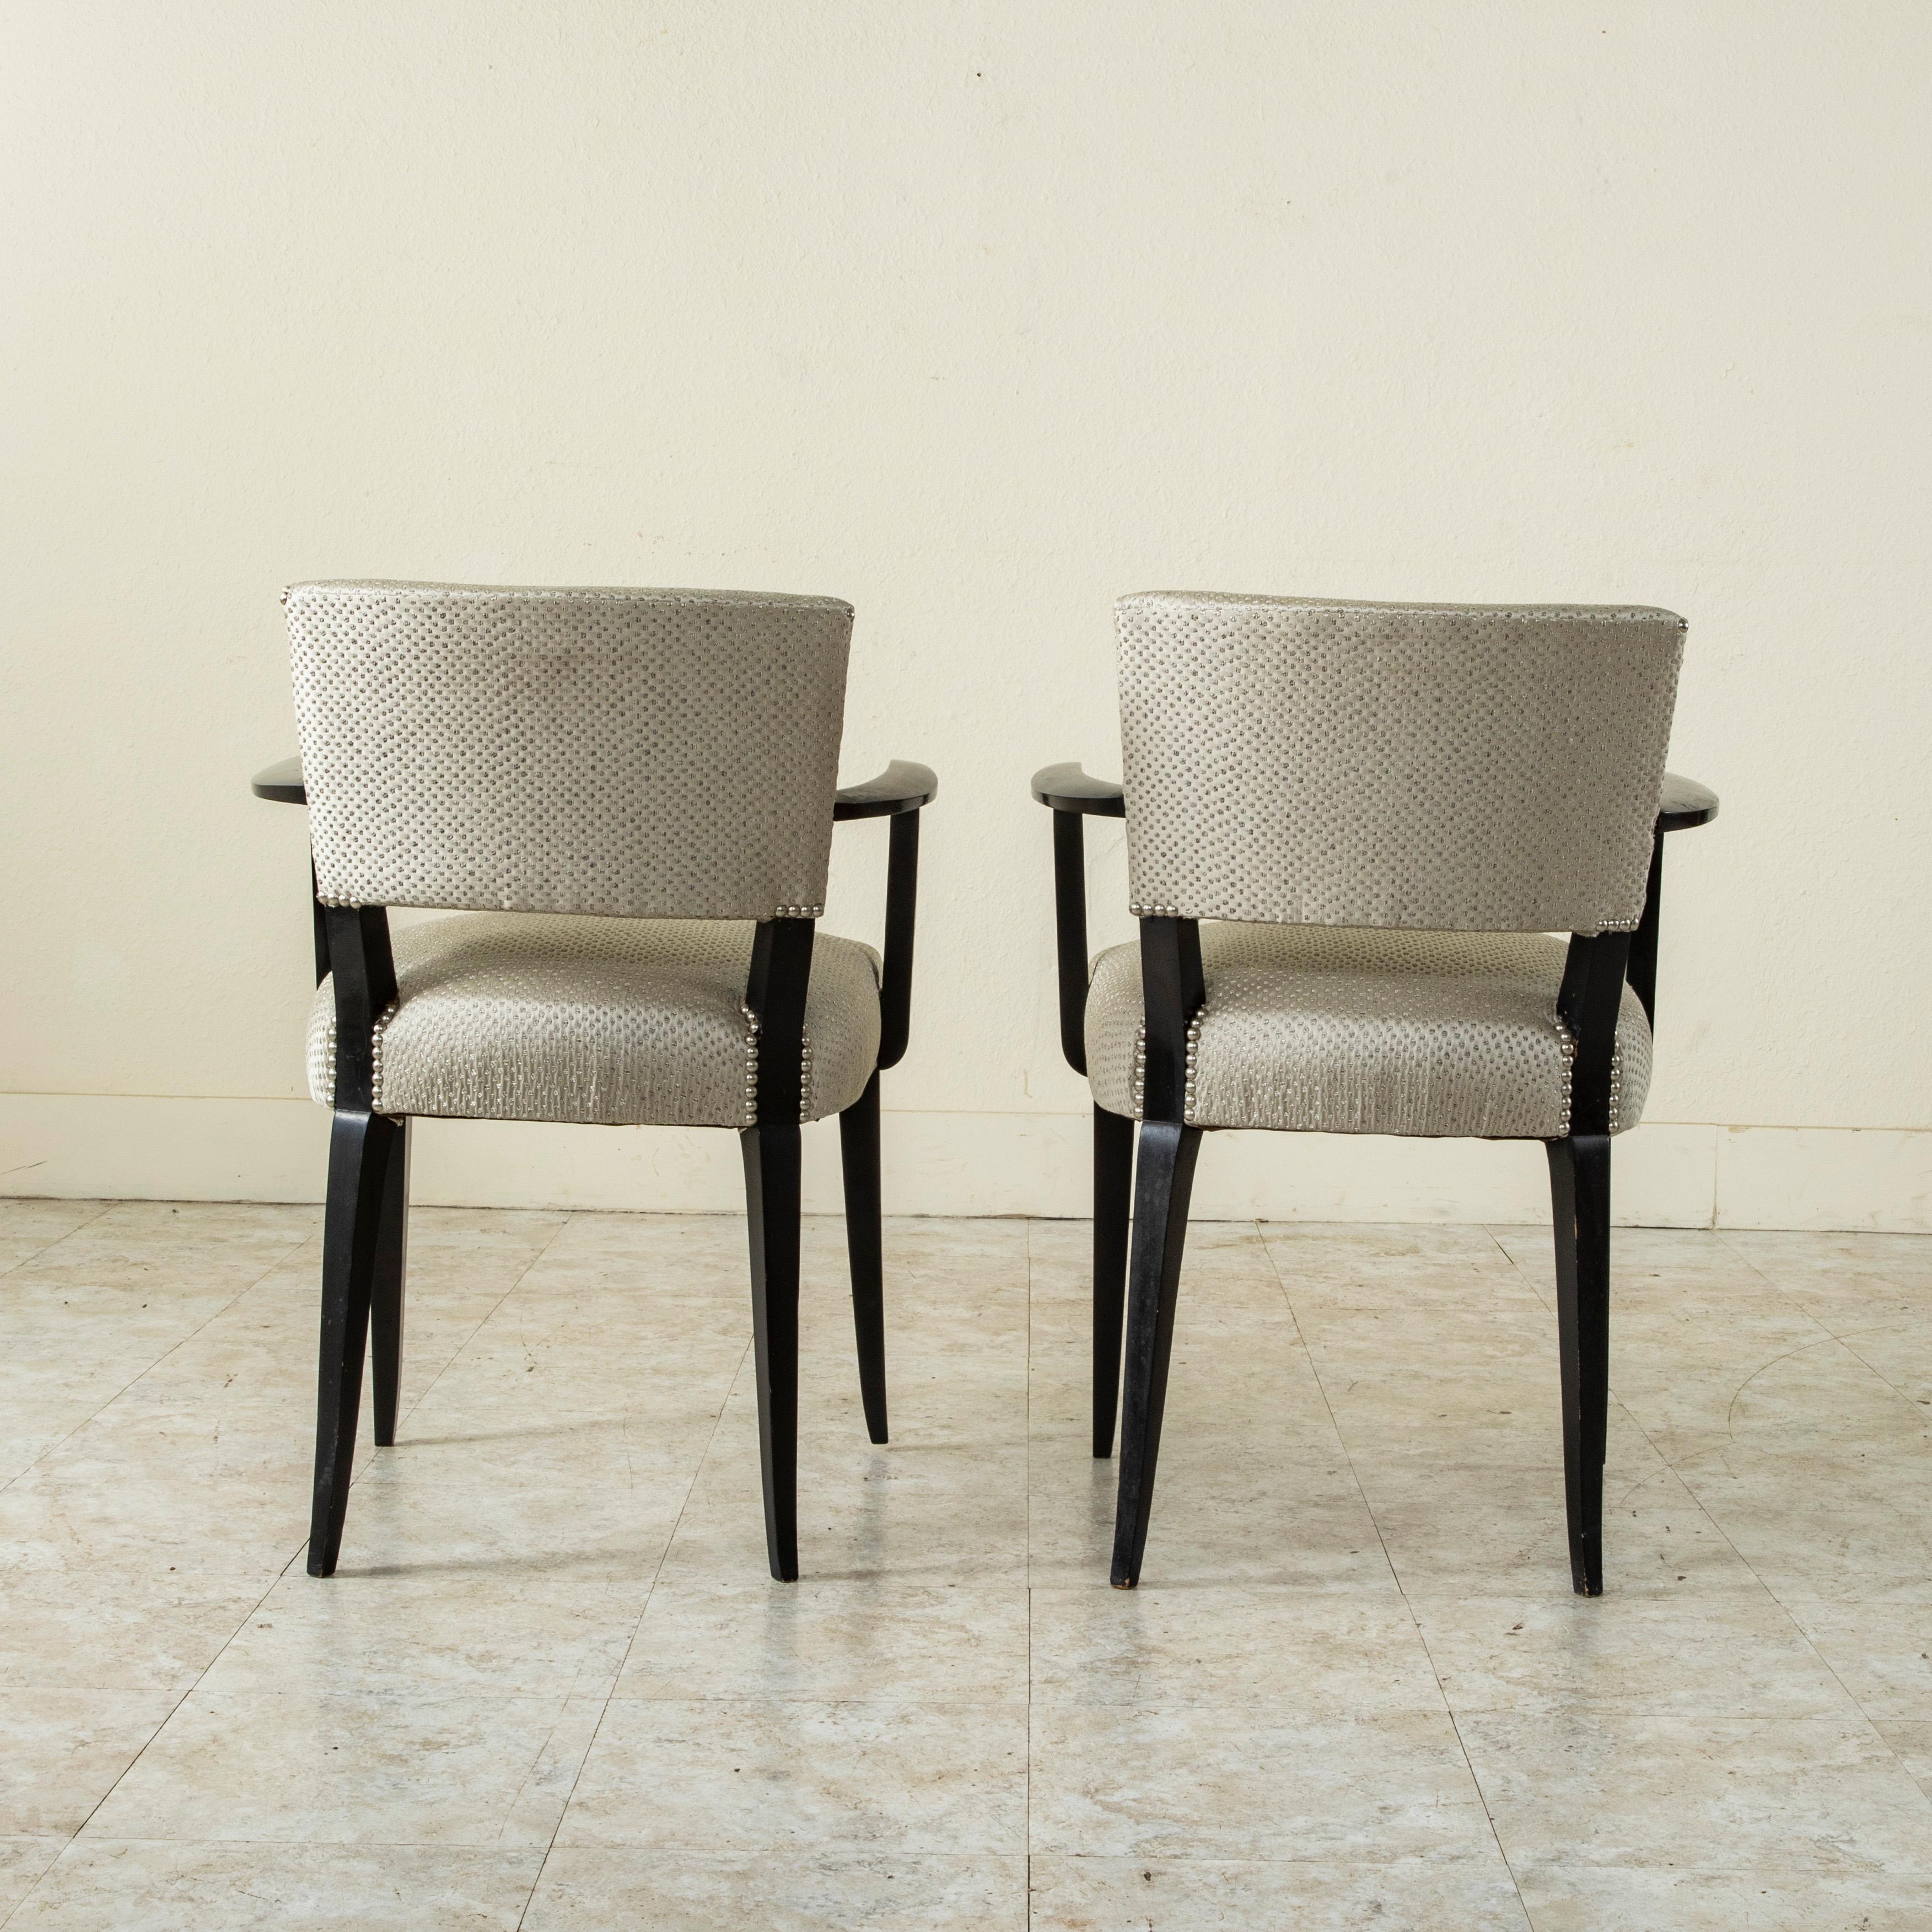 Mid-20th Century French Black Lacquer Bridge Chairs with Nail Head Trim For Sale 1